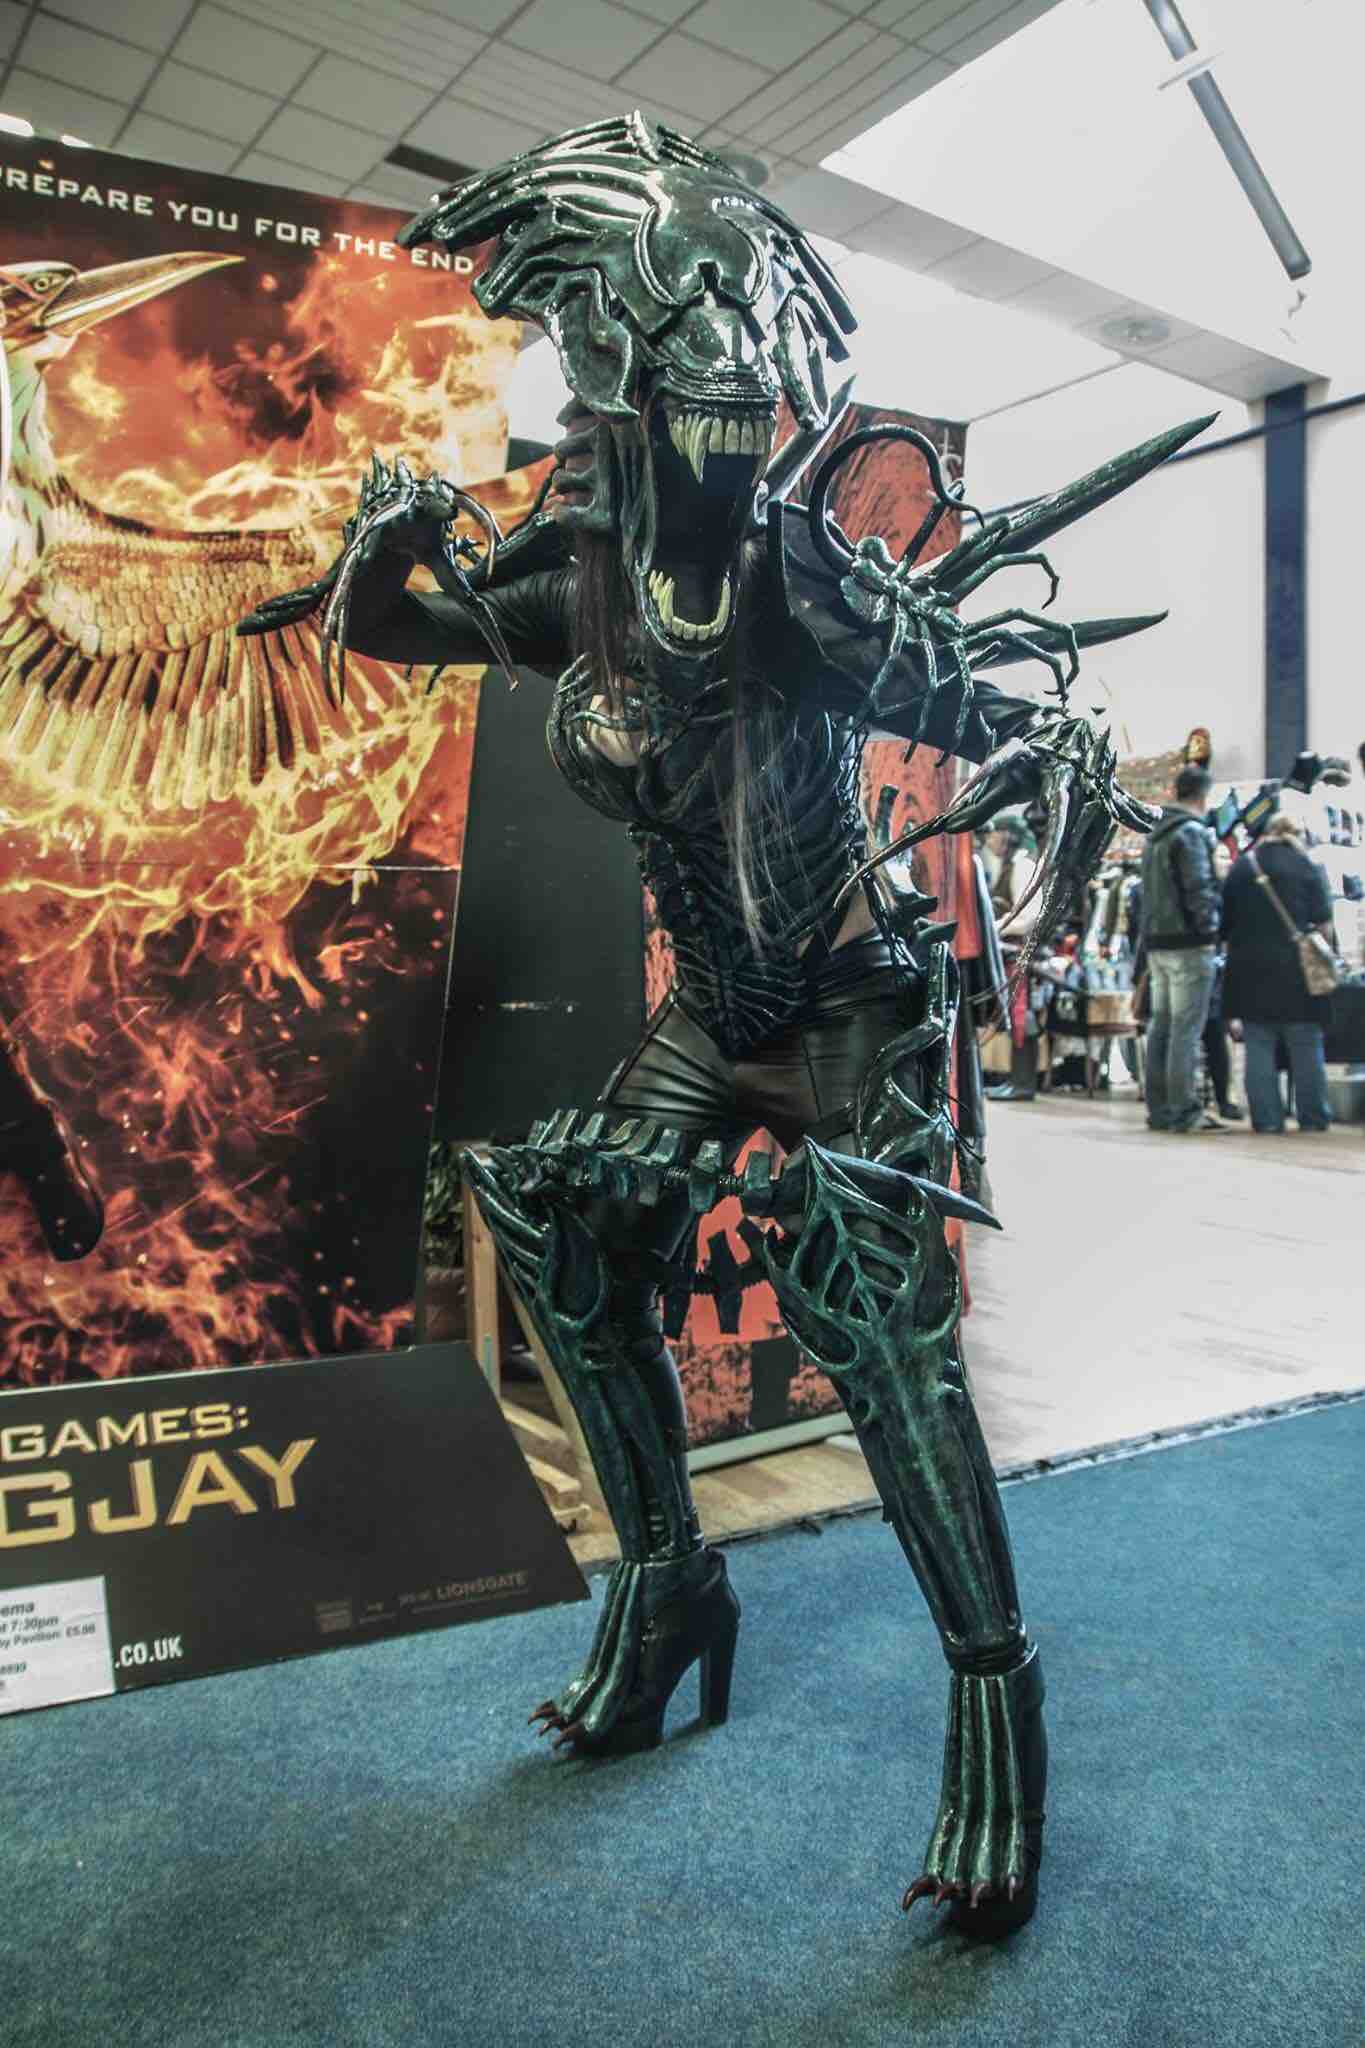 alien cosplay - Repare You For The End 2 Games Gjay ema on .Co.Uk